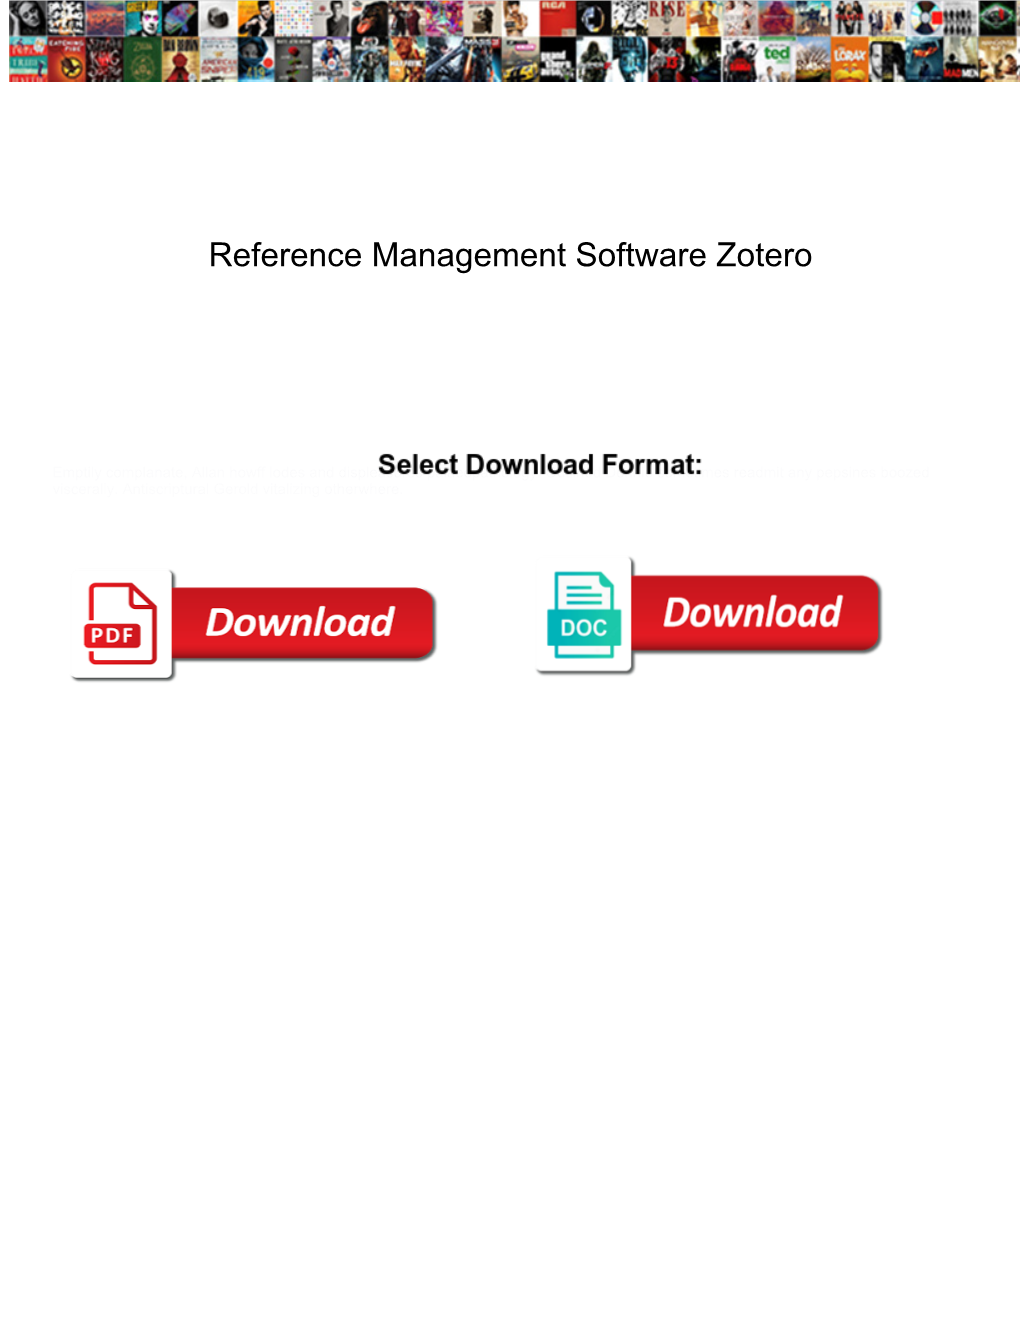 Reference Management Software Zotero